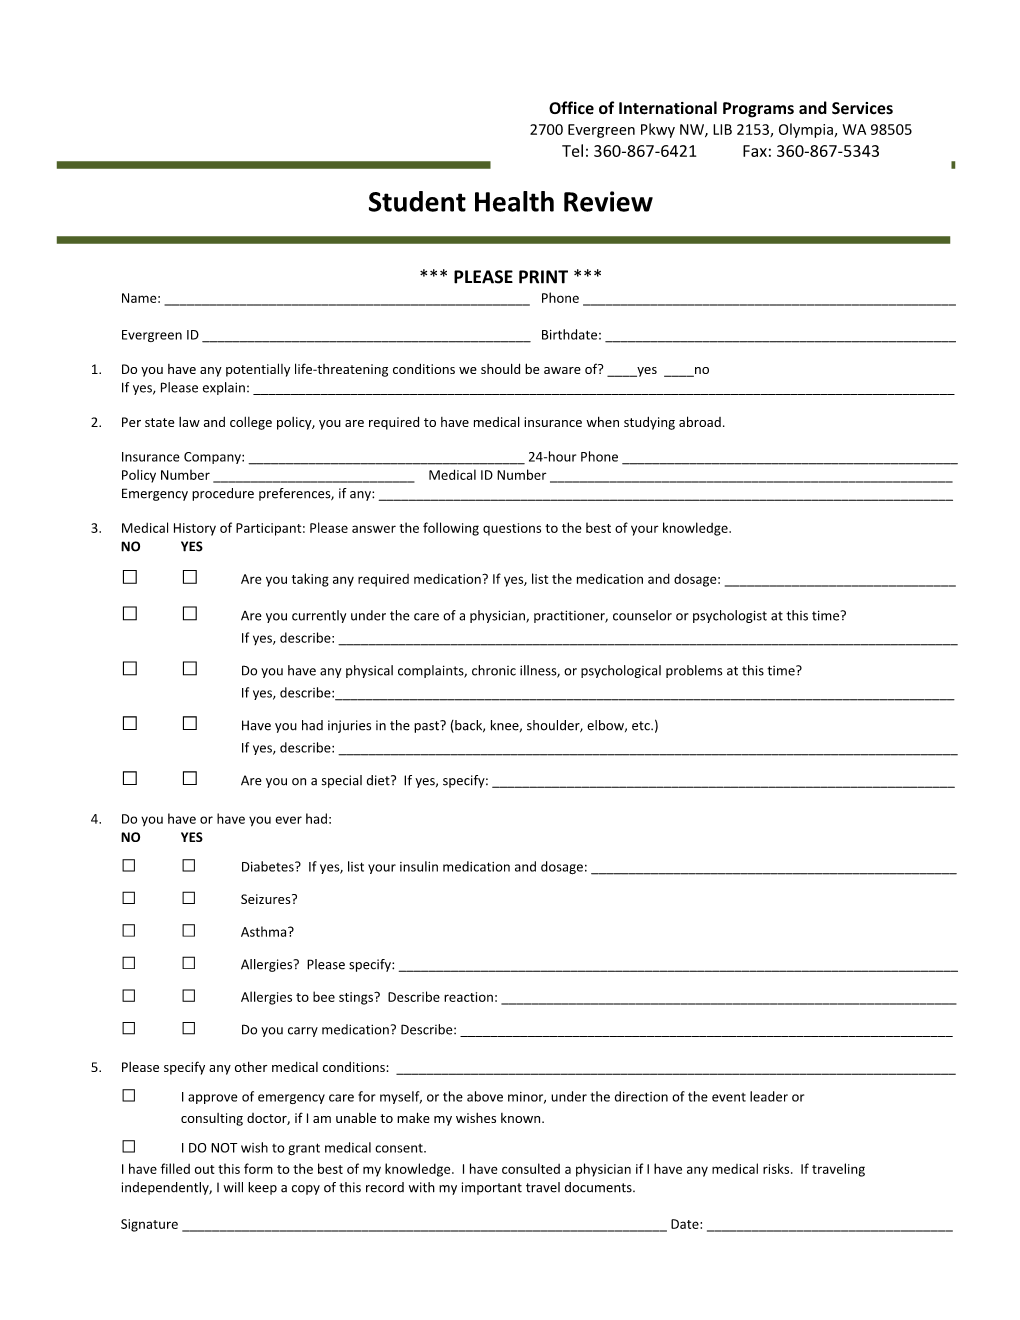 Evergreen Student Health Review Form